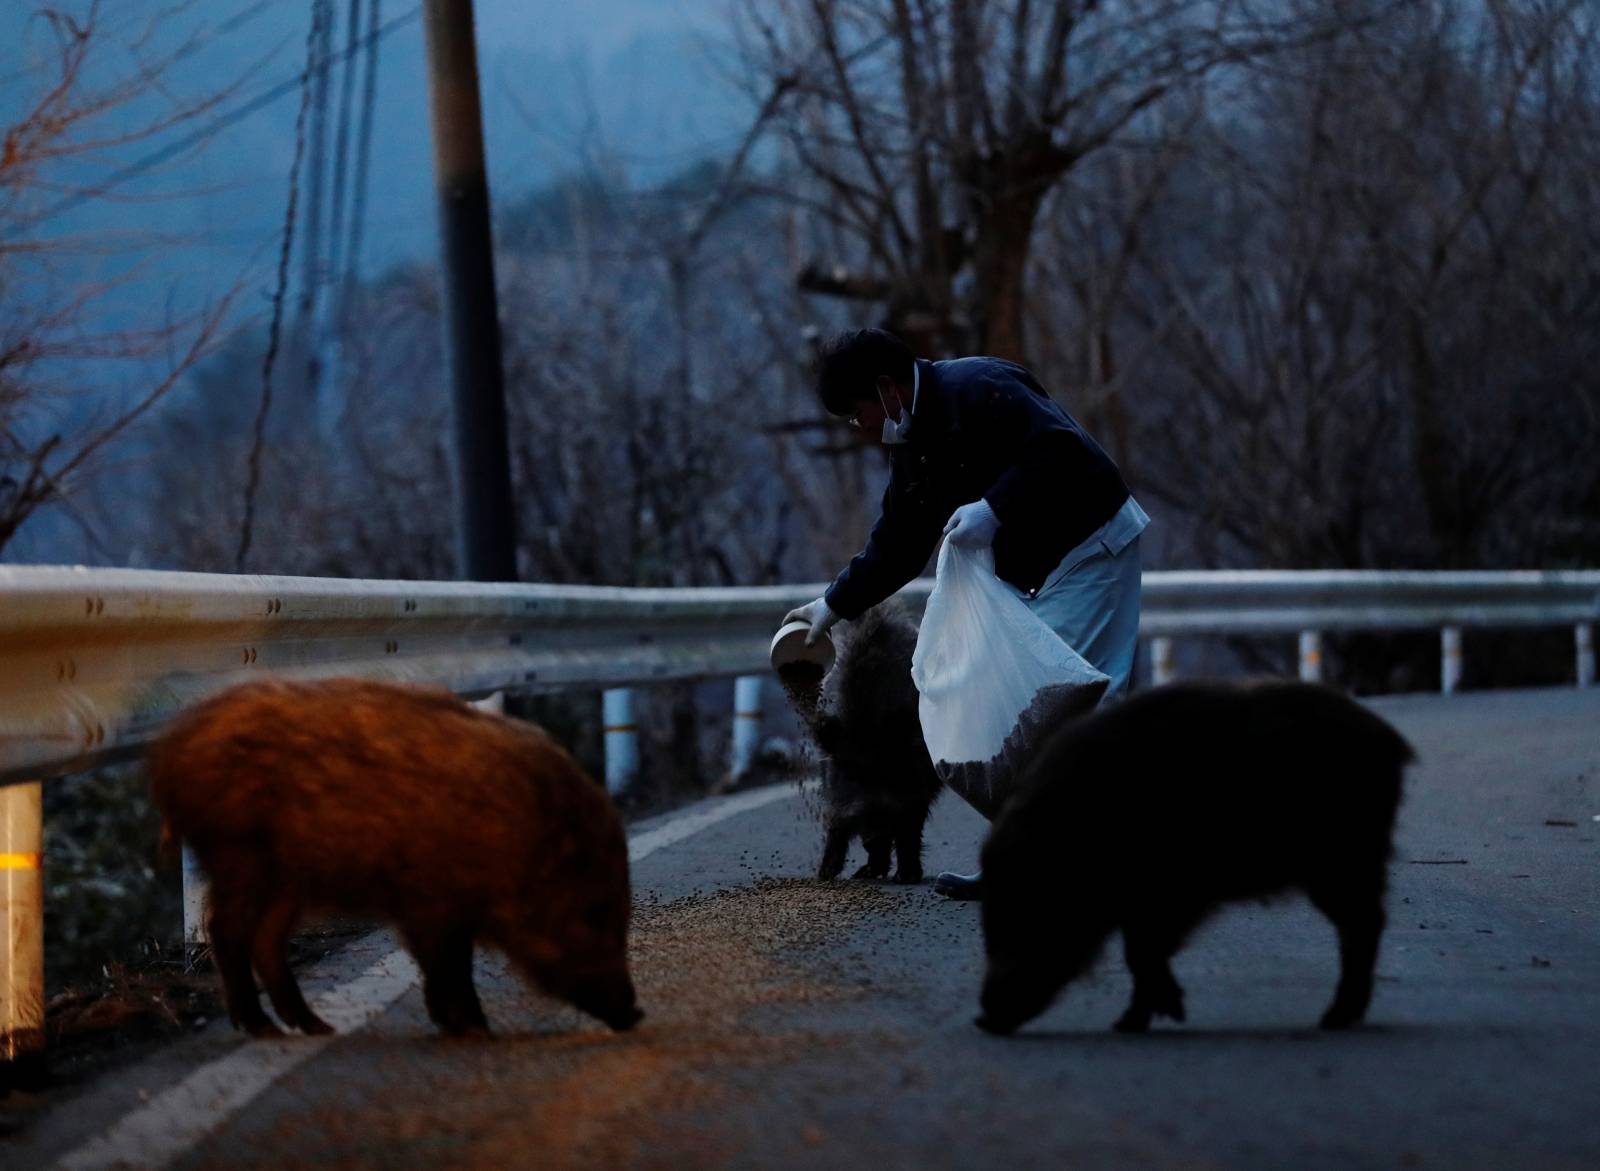 The Wider Image: The man who saves forgotten cats in Fukushima's nuclear zone